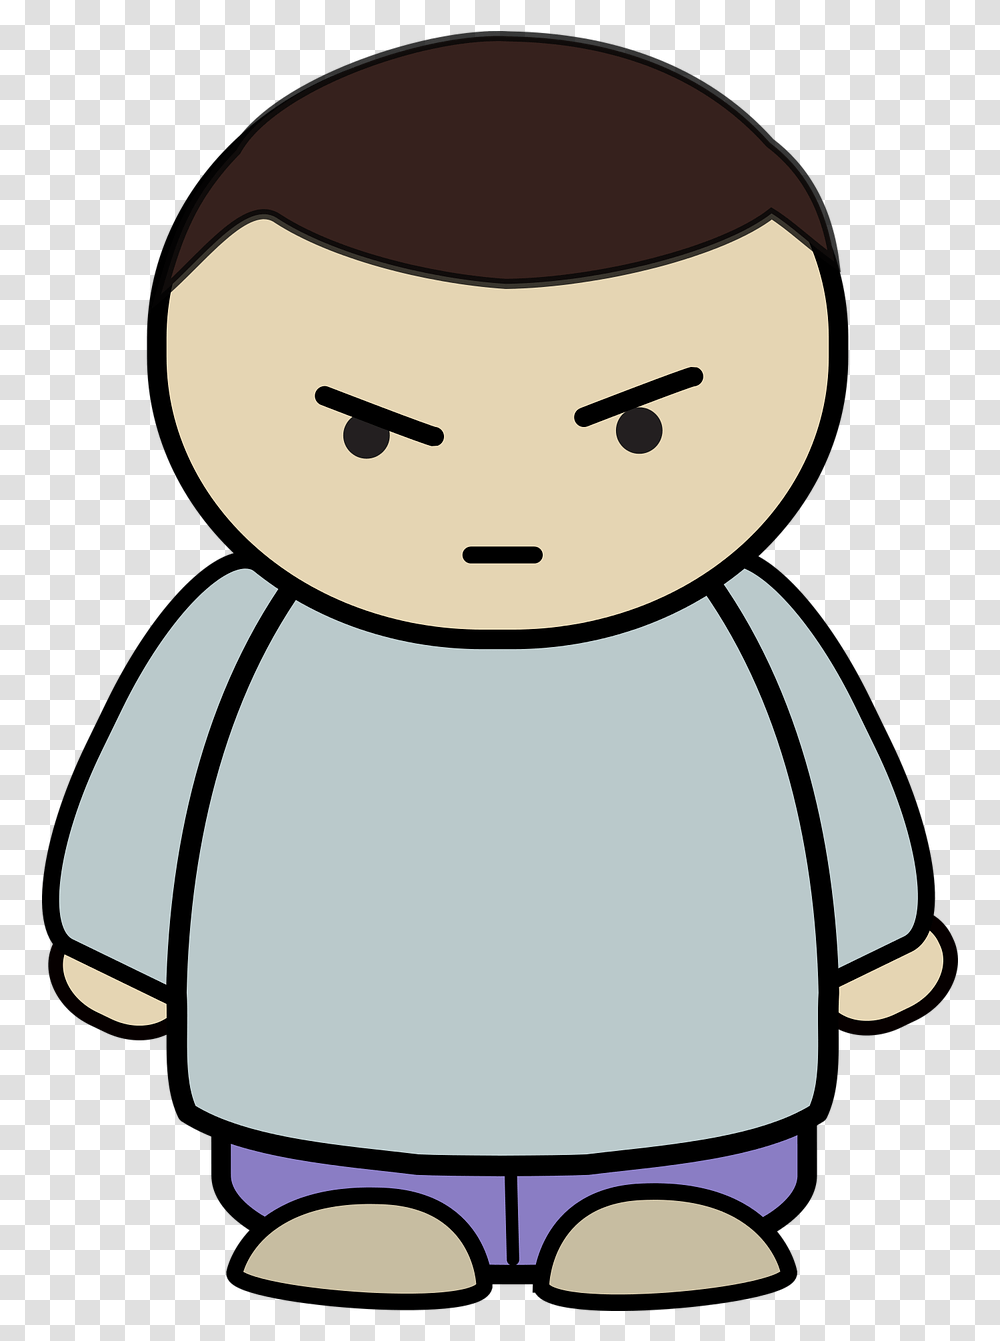 Angry Boy Teenager Free Vector Graphic On Pixabay Angry Character, Toy, Nature, Outdoors, Penguin Transparent Png